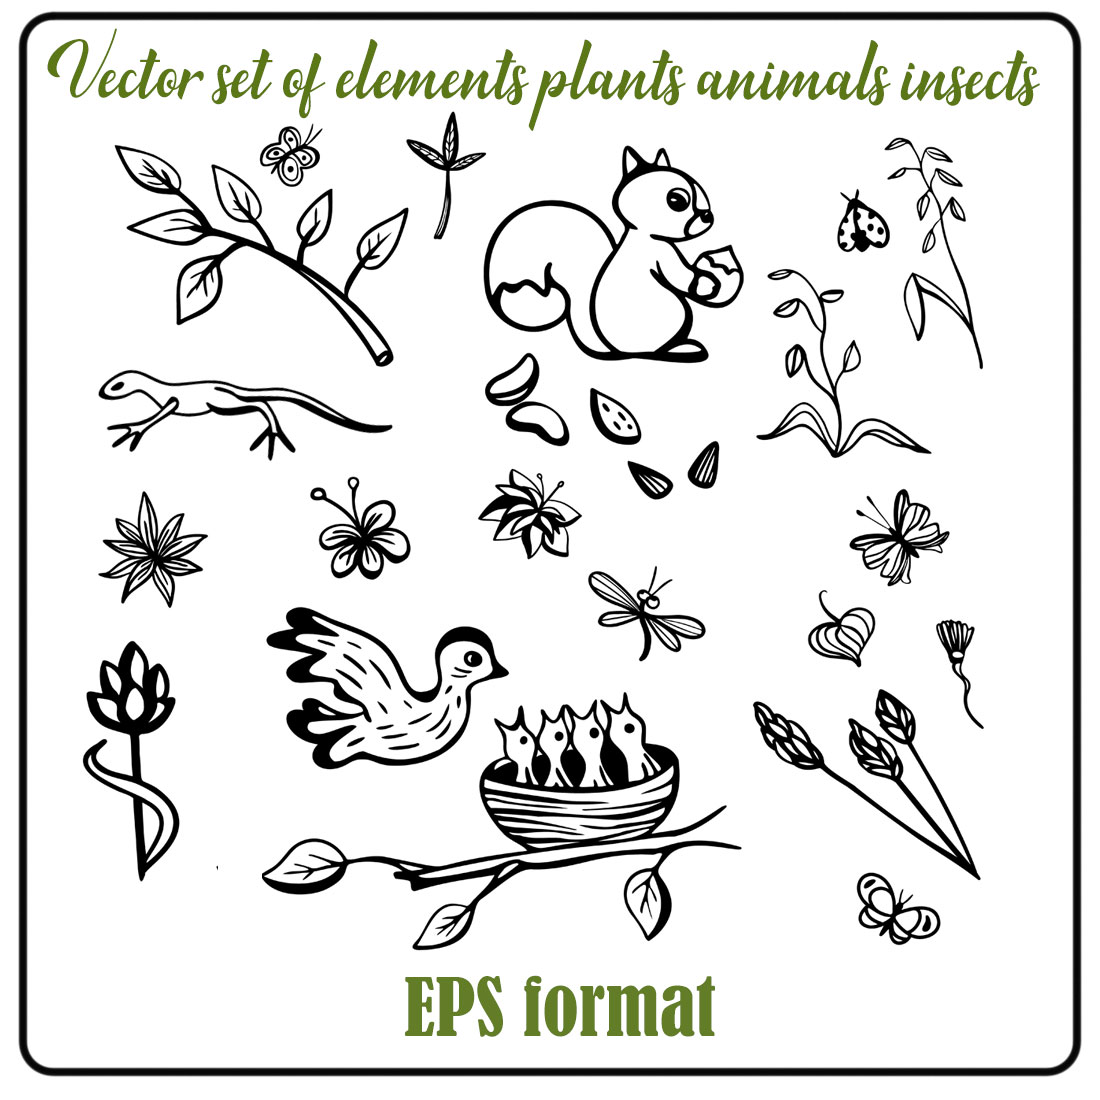 Set of Elements Plants Animals Insects cover image.